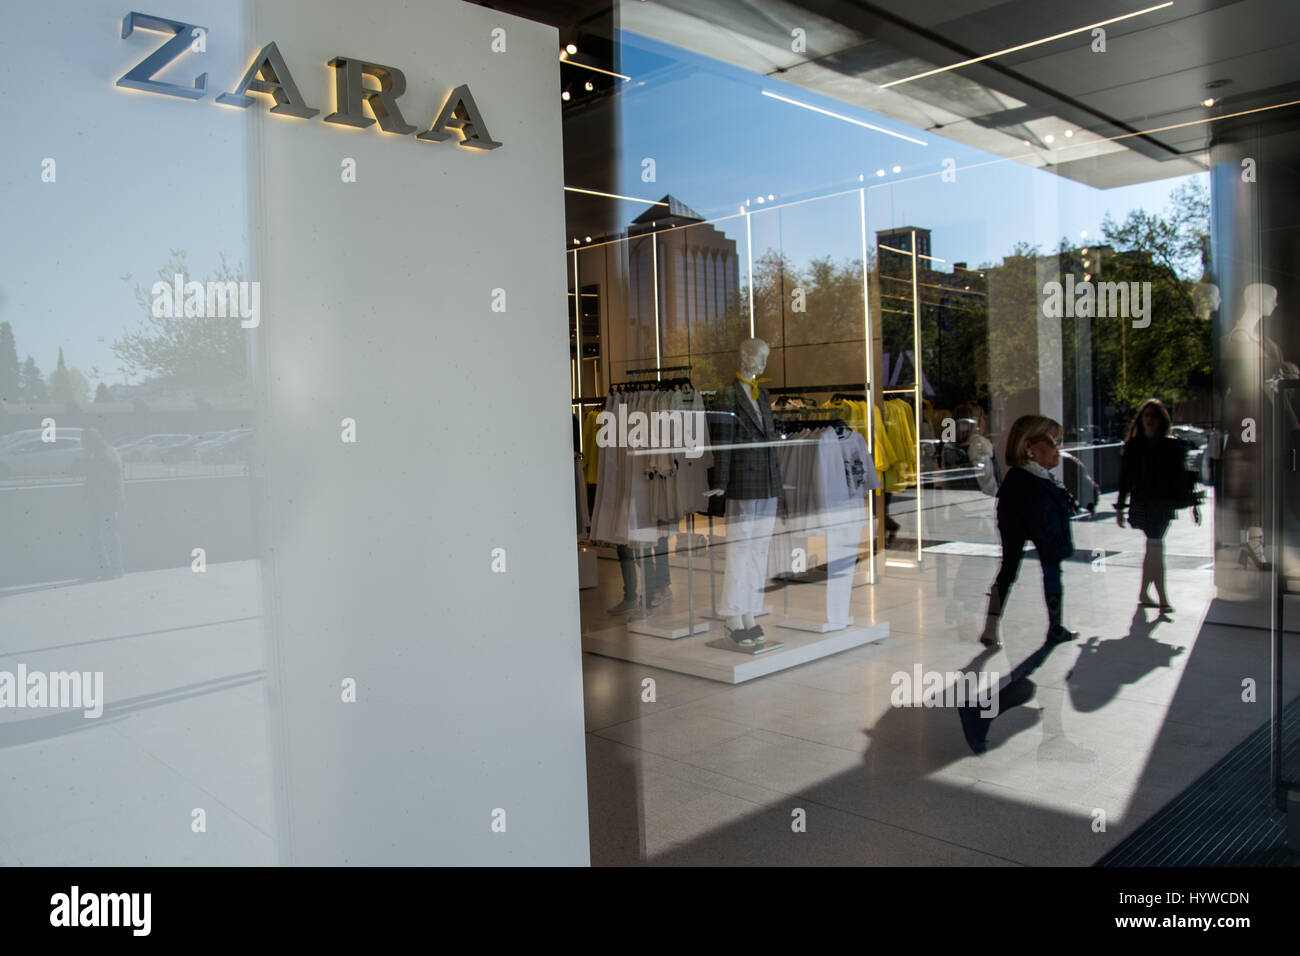 Madrid, Spain. 7th Apr 2017. Opening day of the world's biggest Zara store  with 6,000 square meters in Madrid Spain. Credit: Marcos del Mazo/Alamy  Live News Stock Photo - Alamy